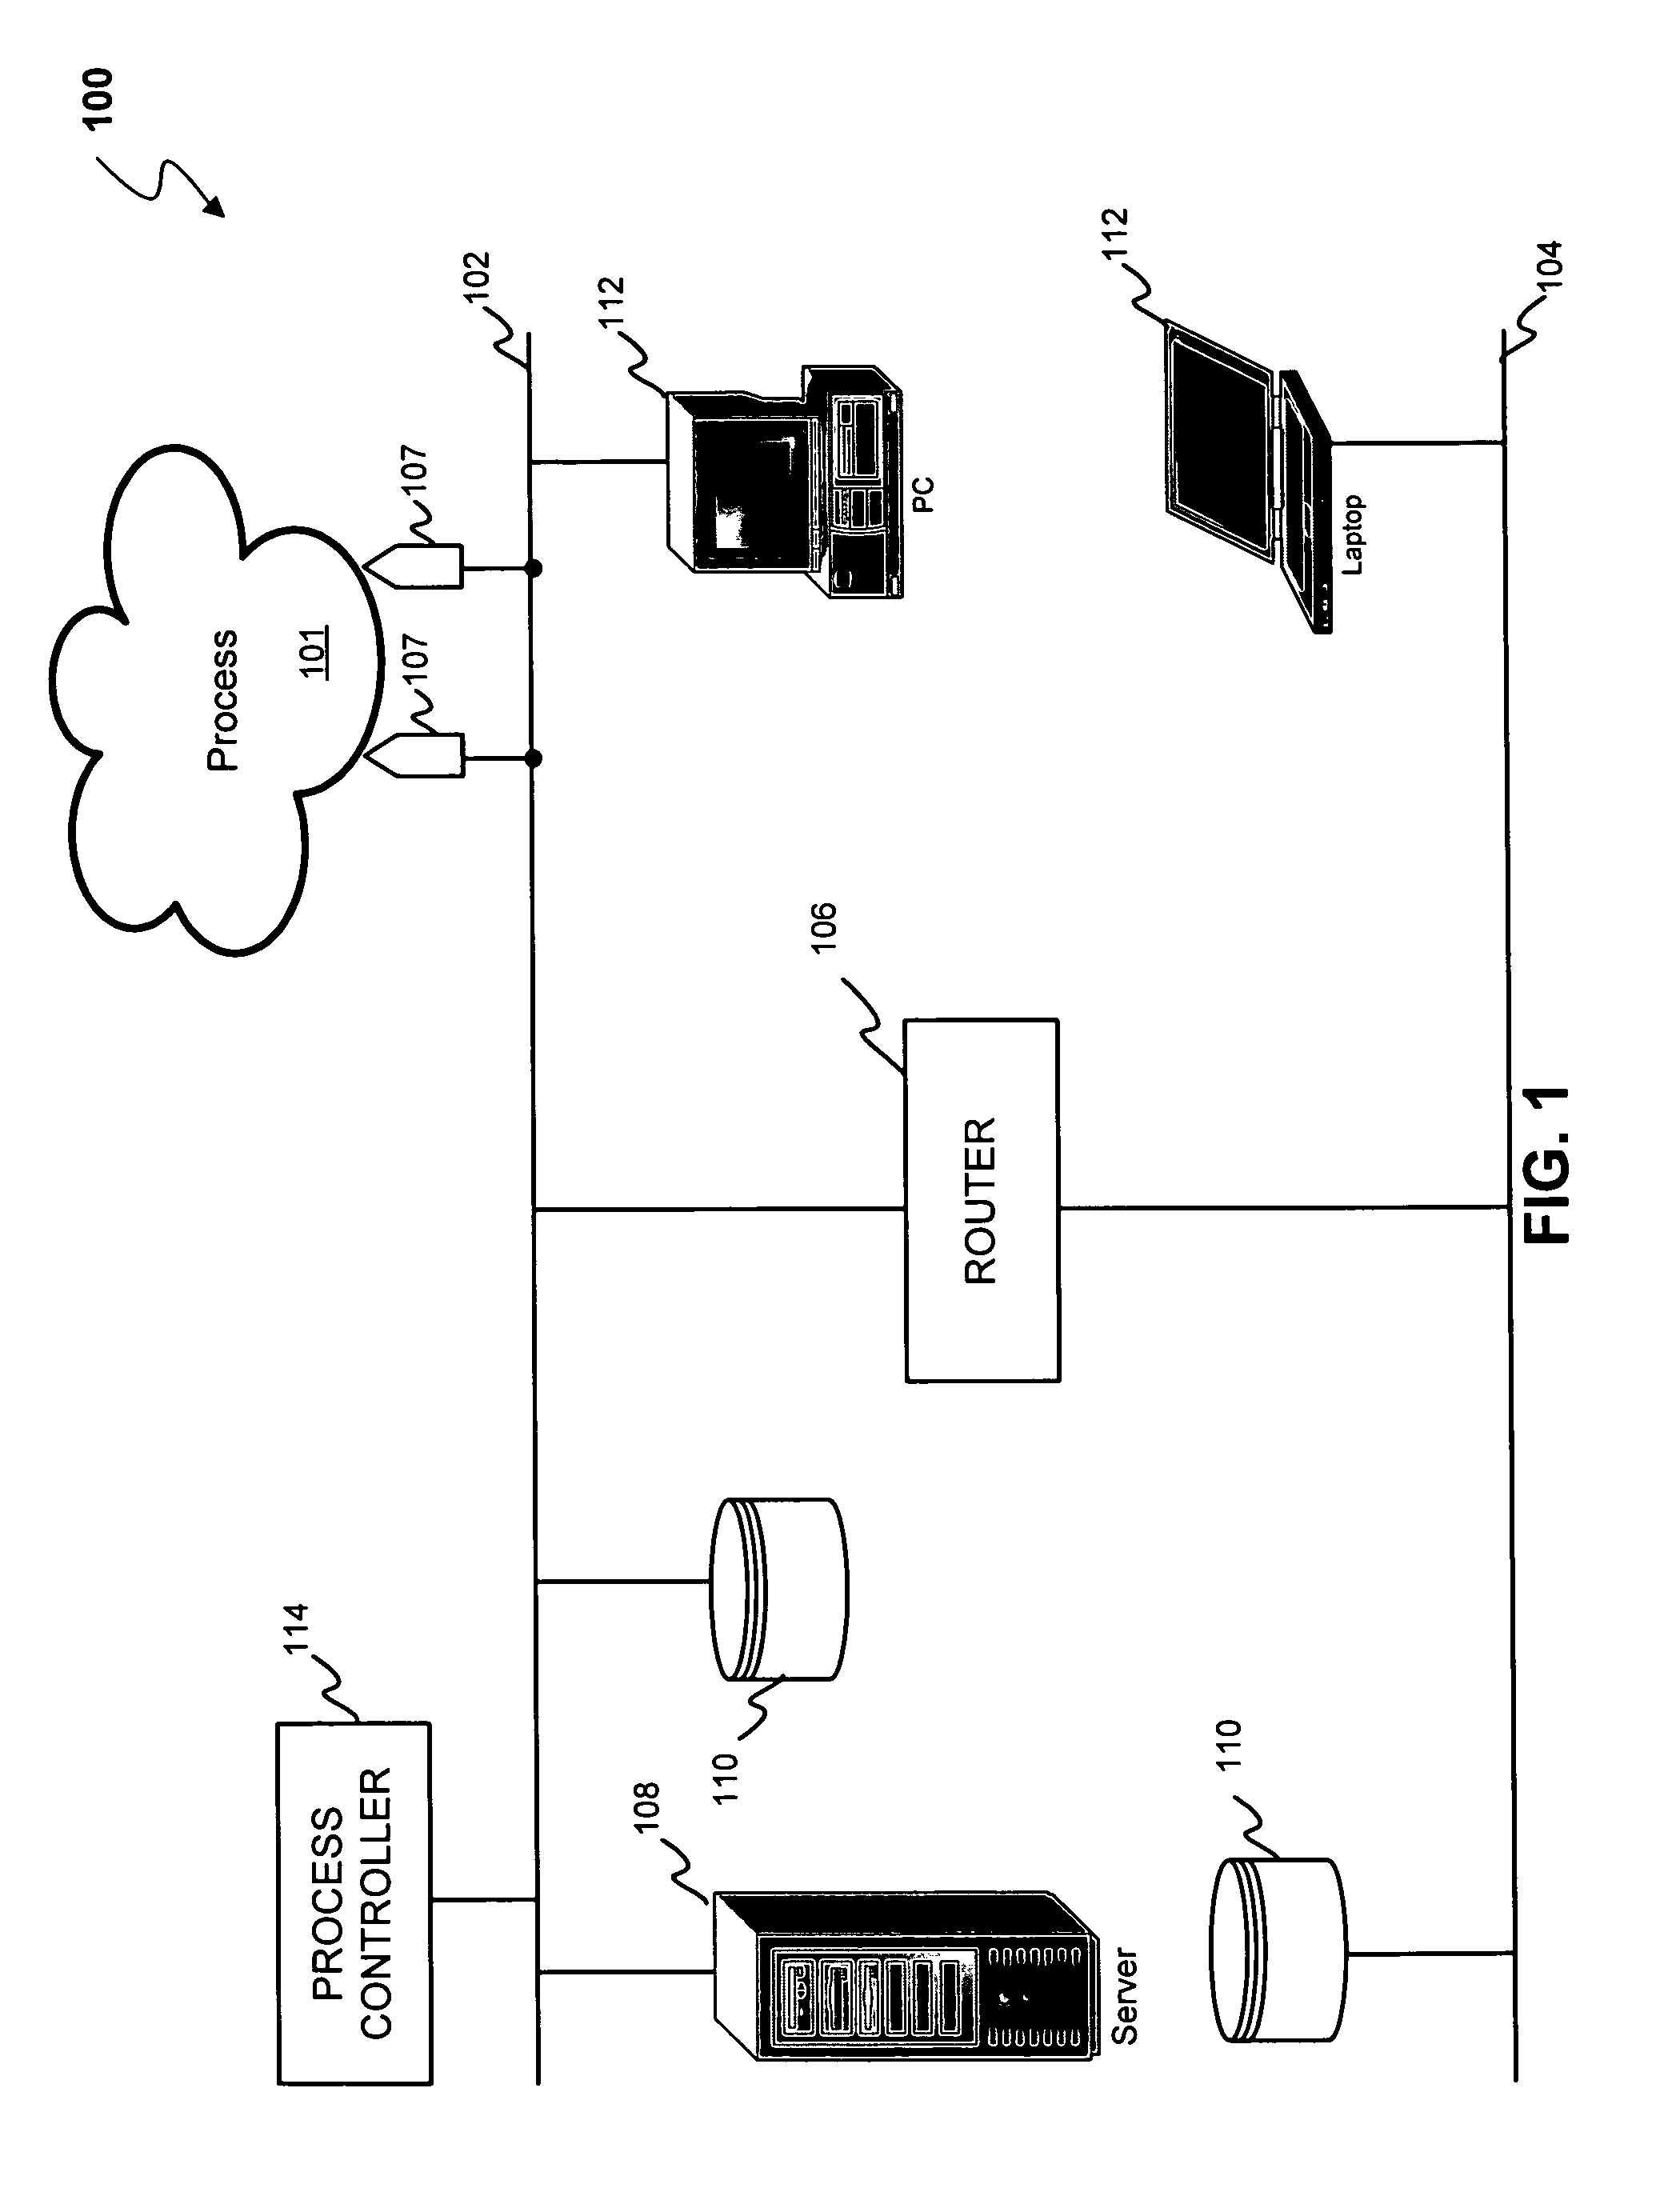 System and method for efficient computation of simulated thermodynamic property and phase equilibrium characteristics using comprehensive local property models